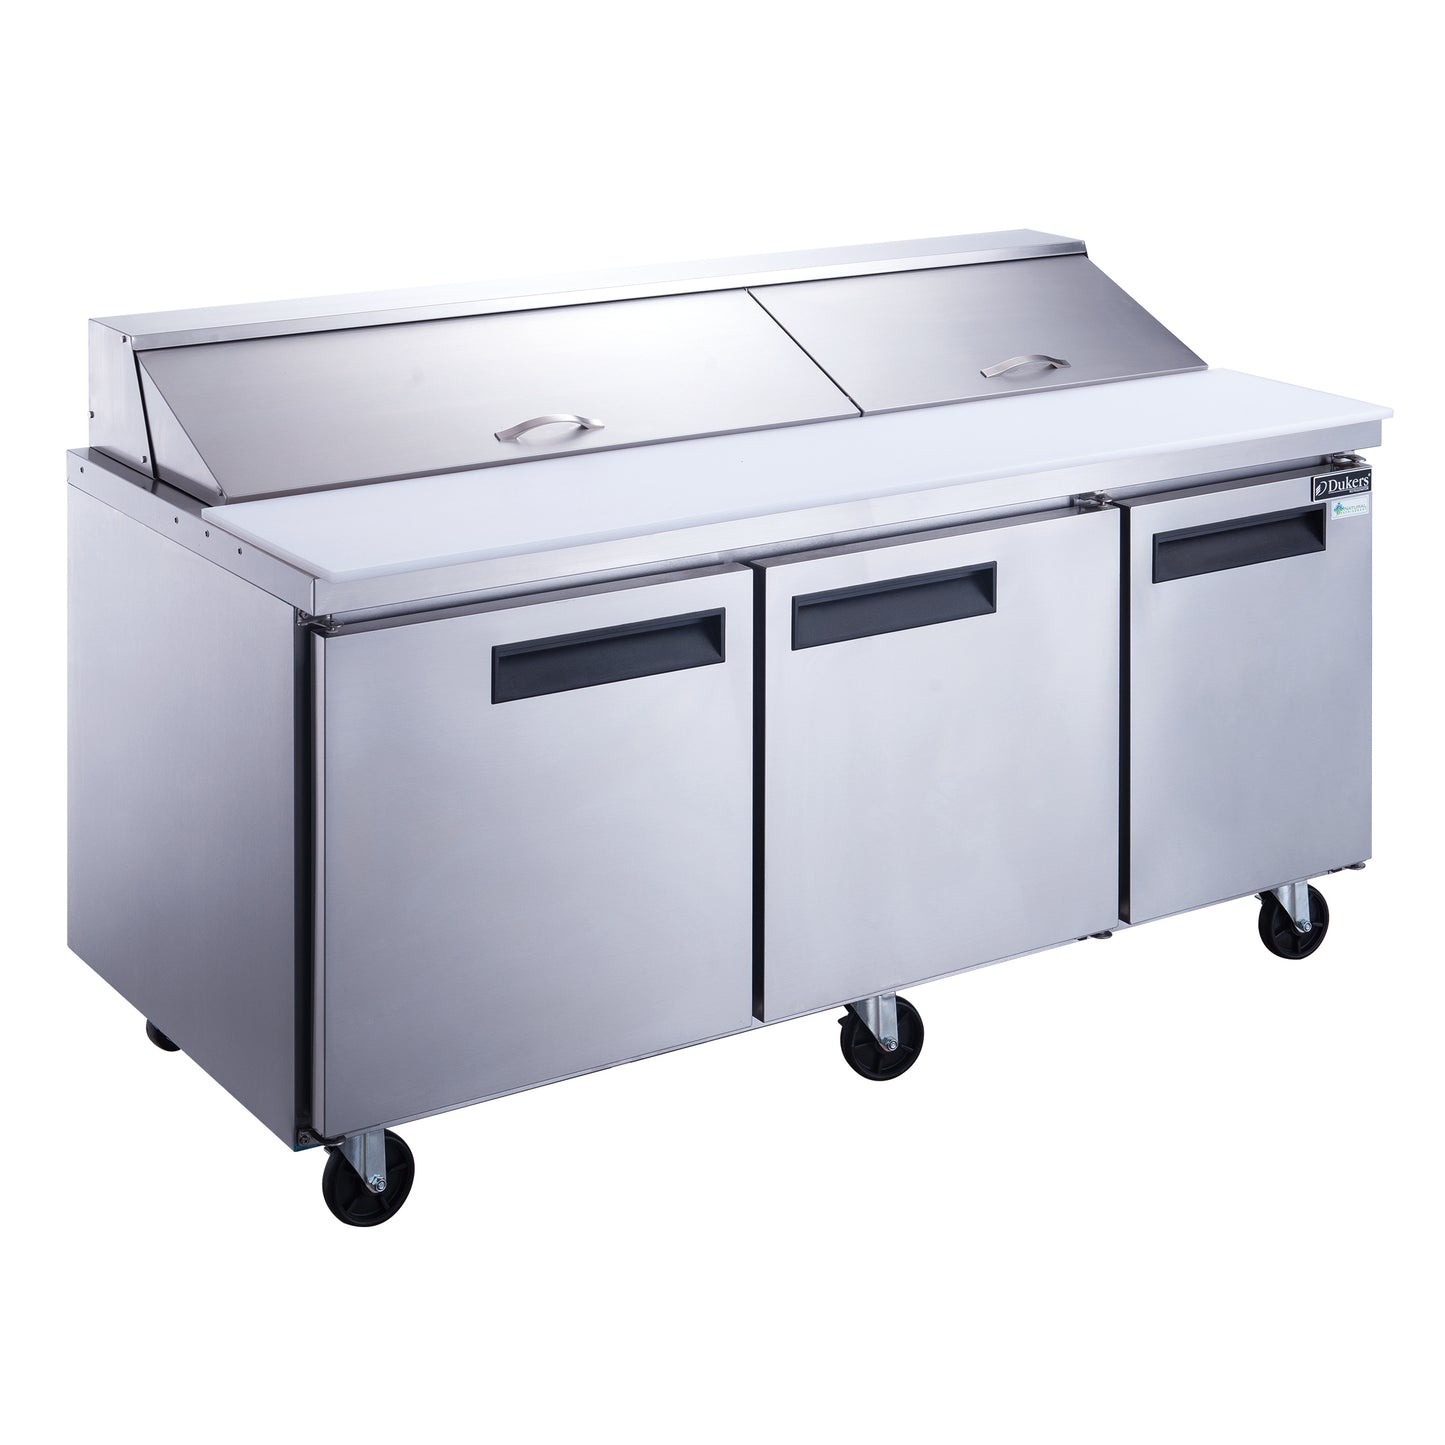 Dukers DSP72-18-S3 3-Door Commercial Food Prep Table Refrigerator in Stainless Steel